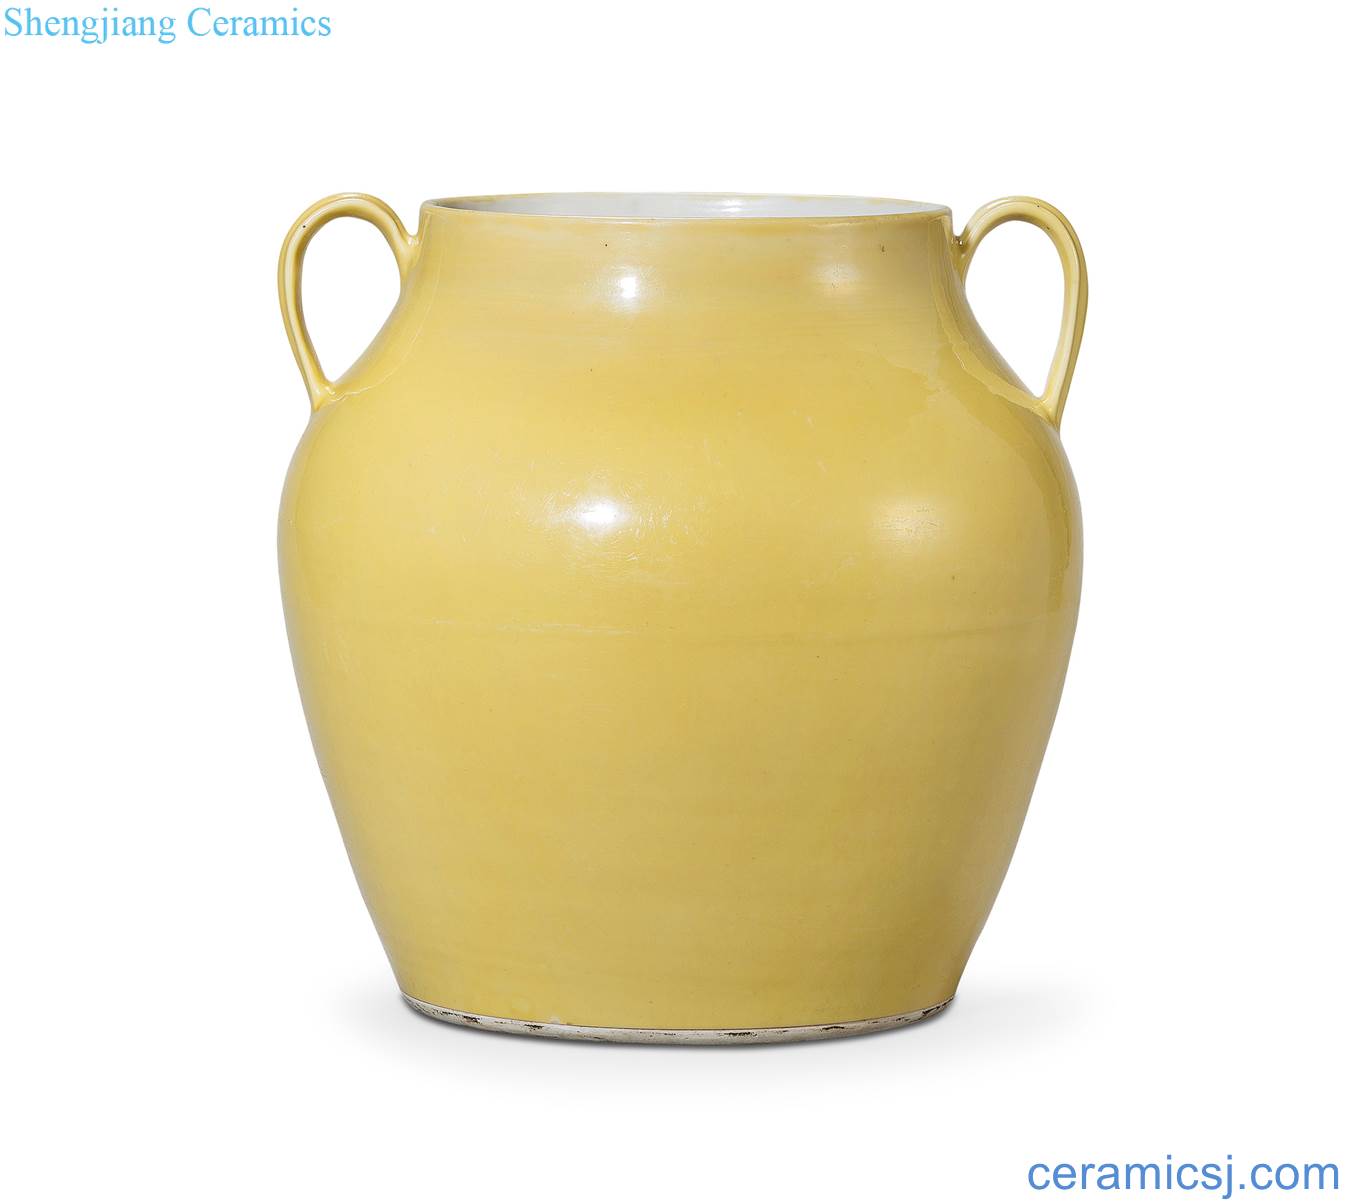 The late Ming dynasty Yellow glazed pot